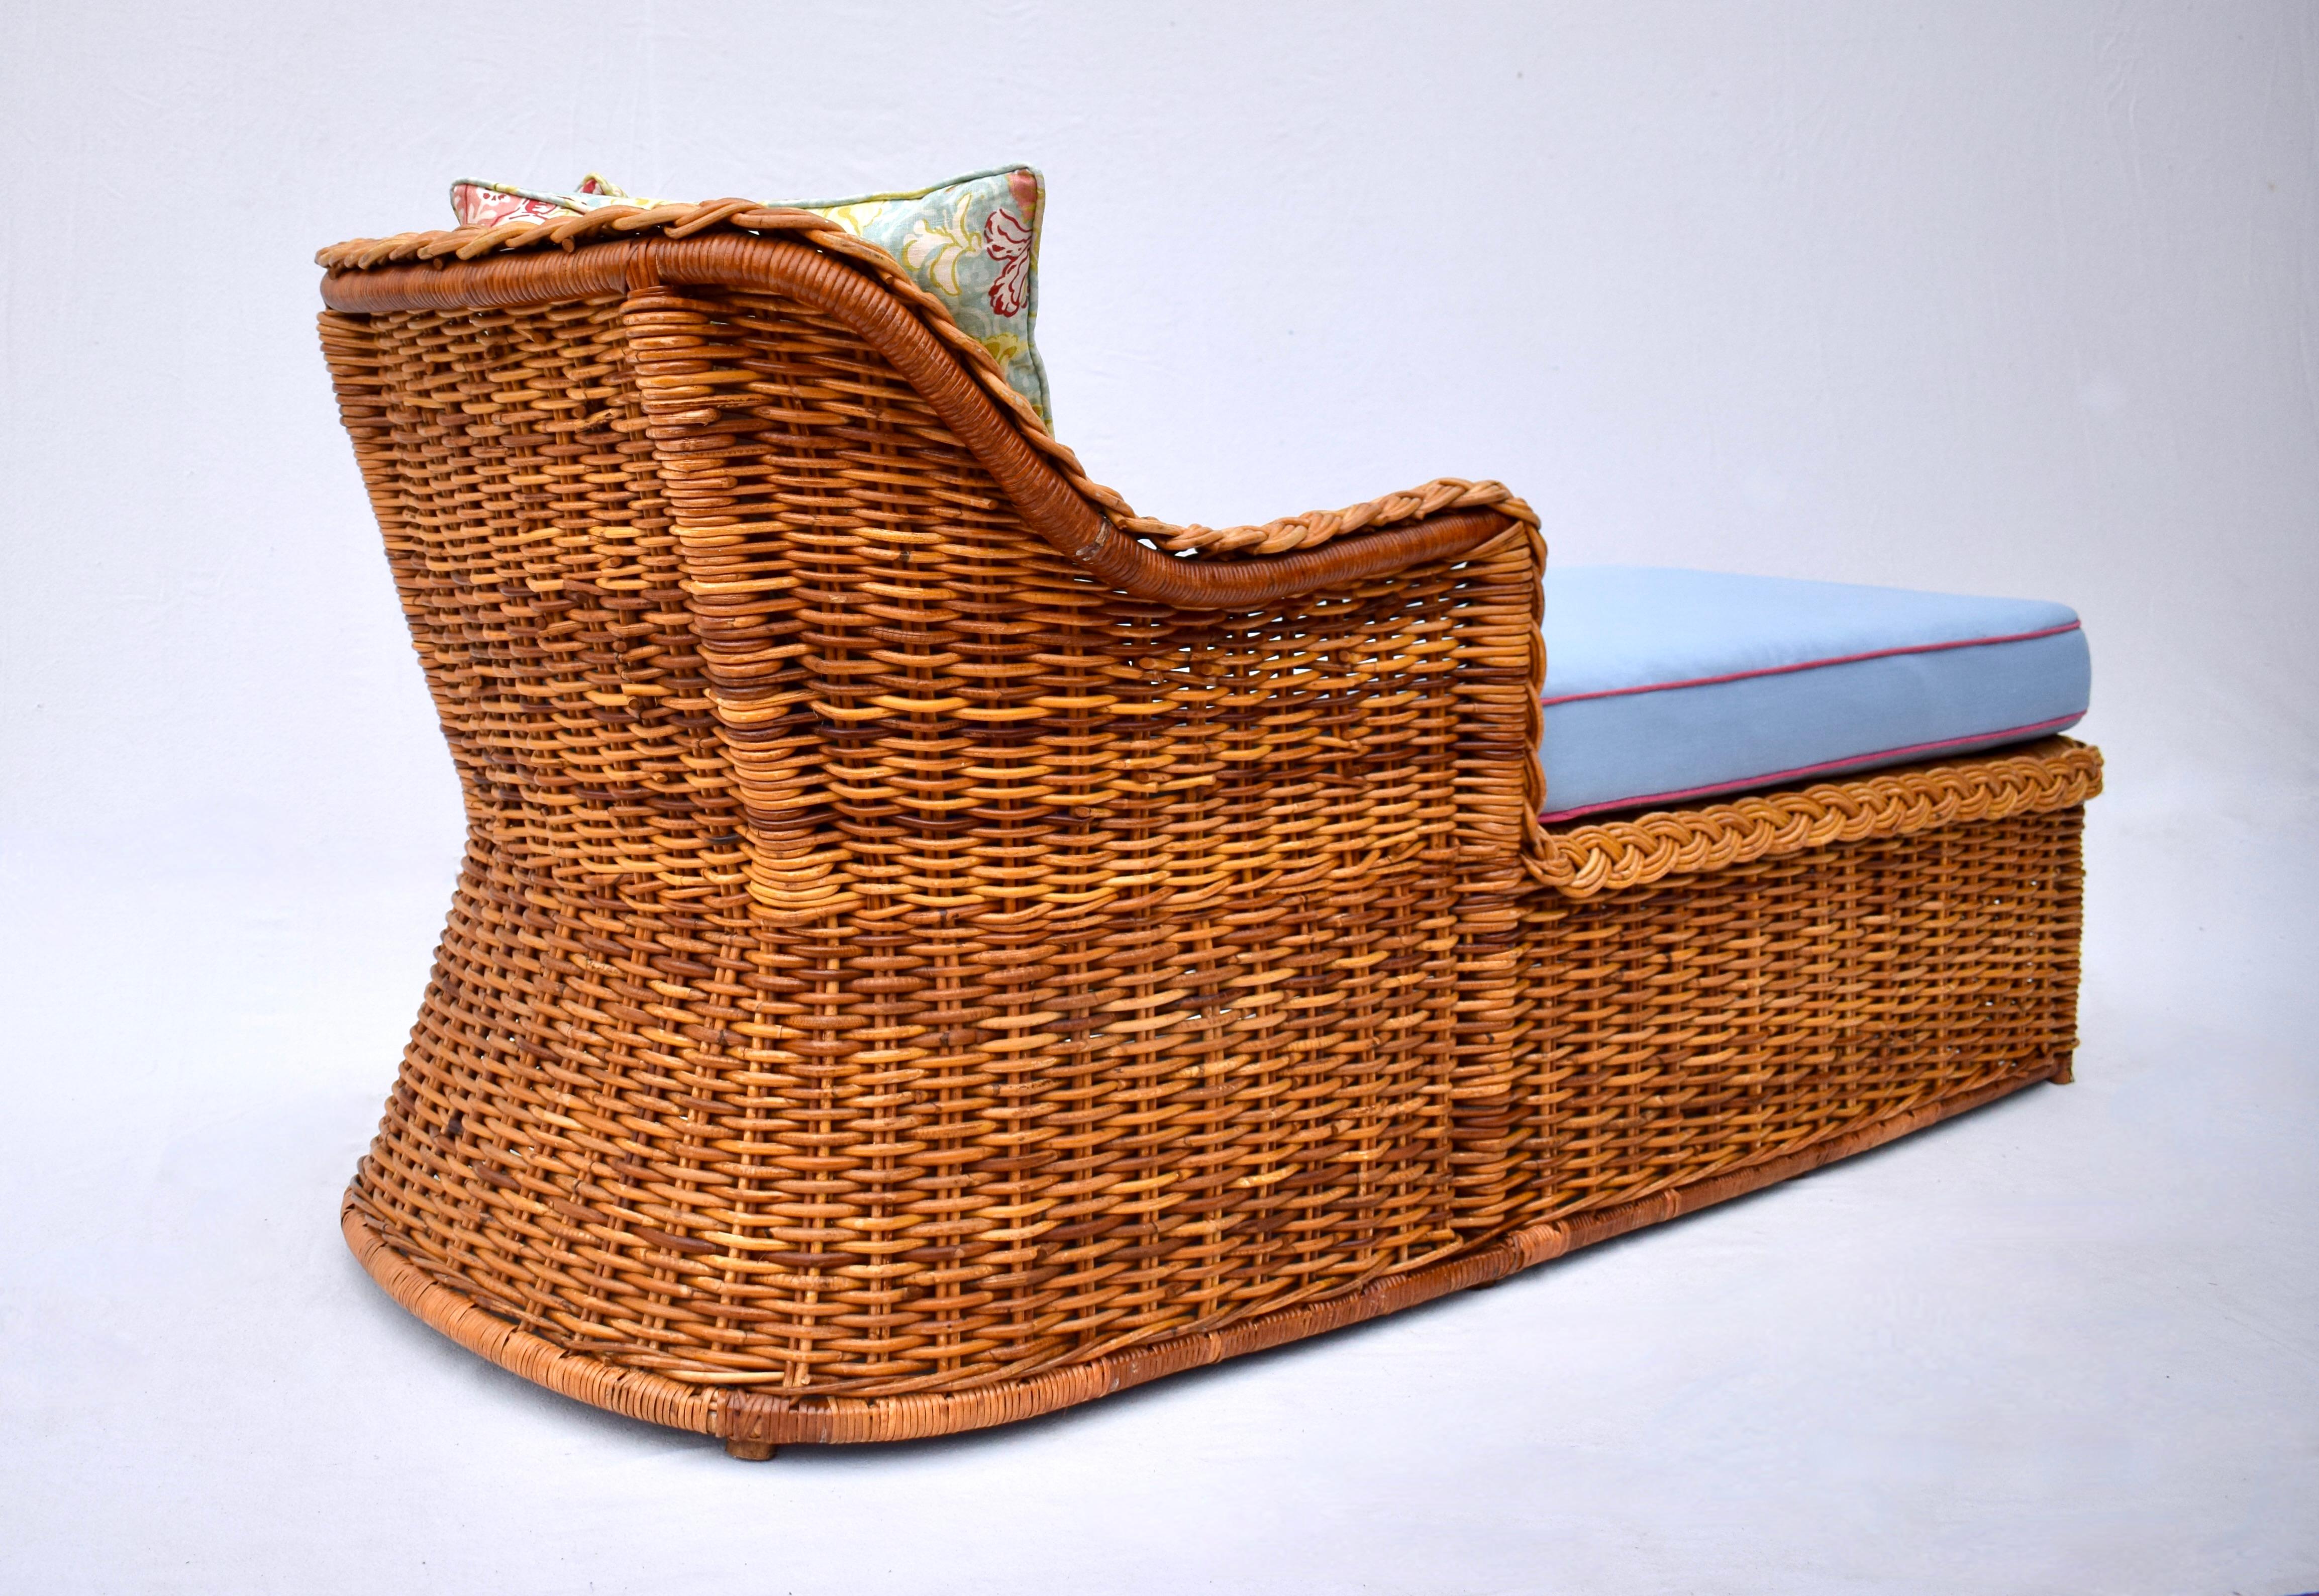 Linen 1960's Michael Taylor Braided Wicker Rattan Chaise Lounge Daybed For Sale